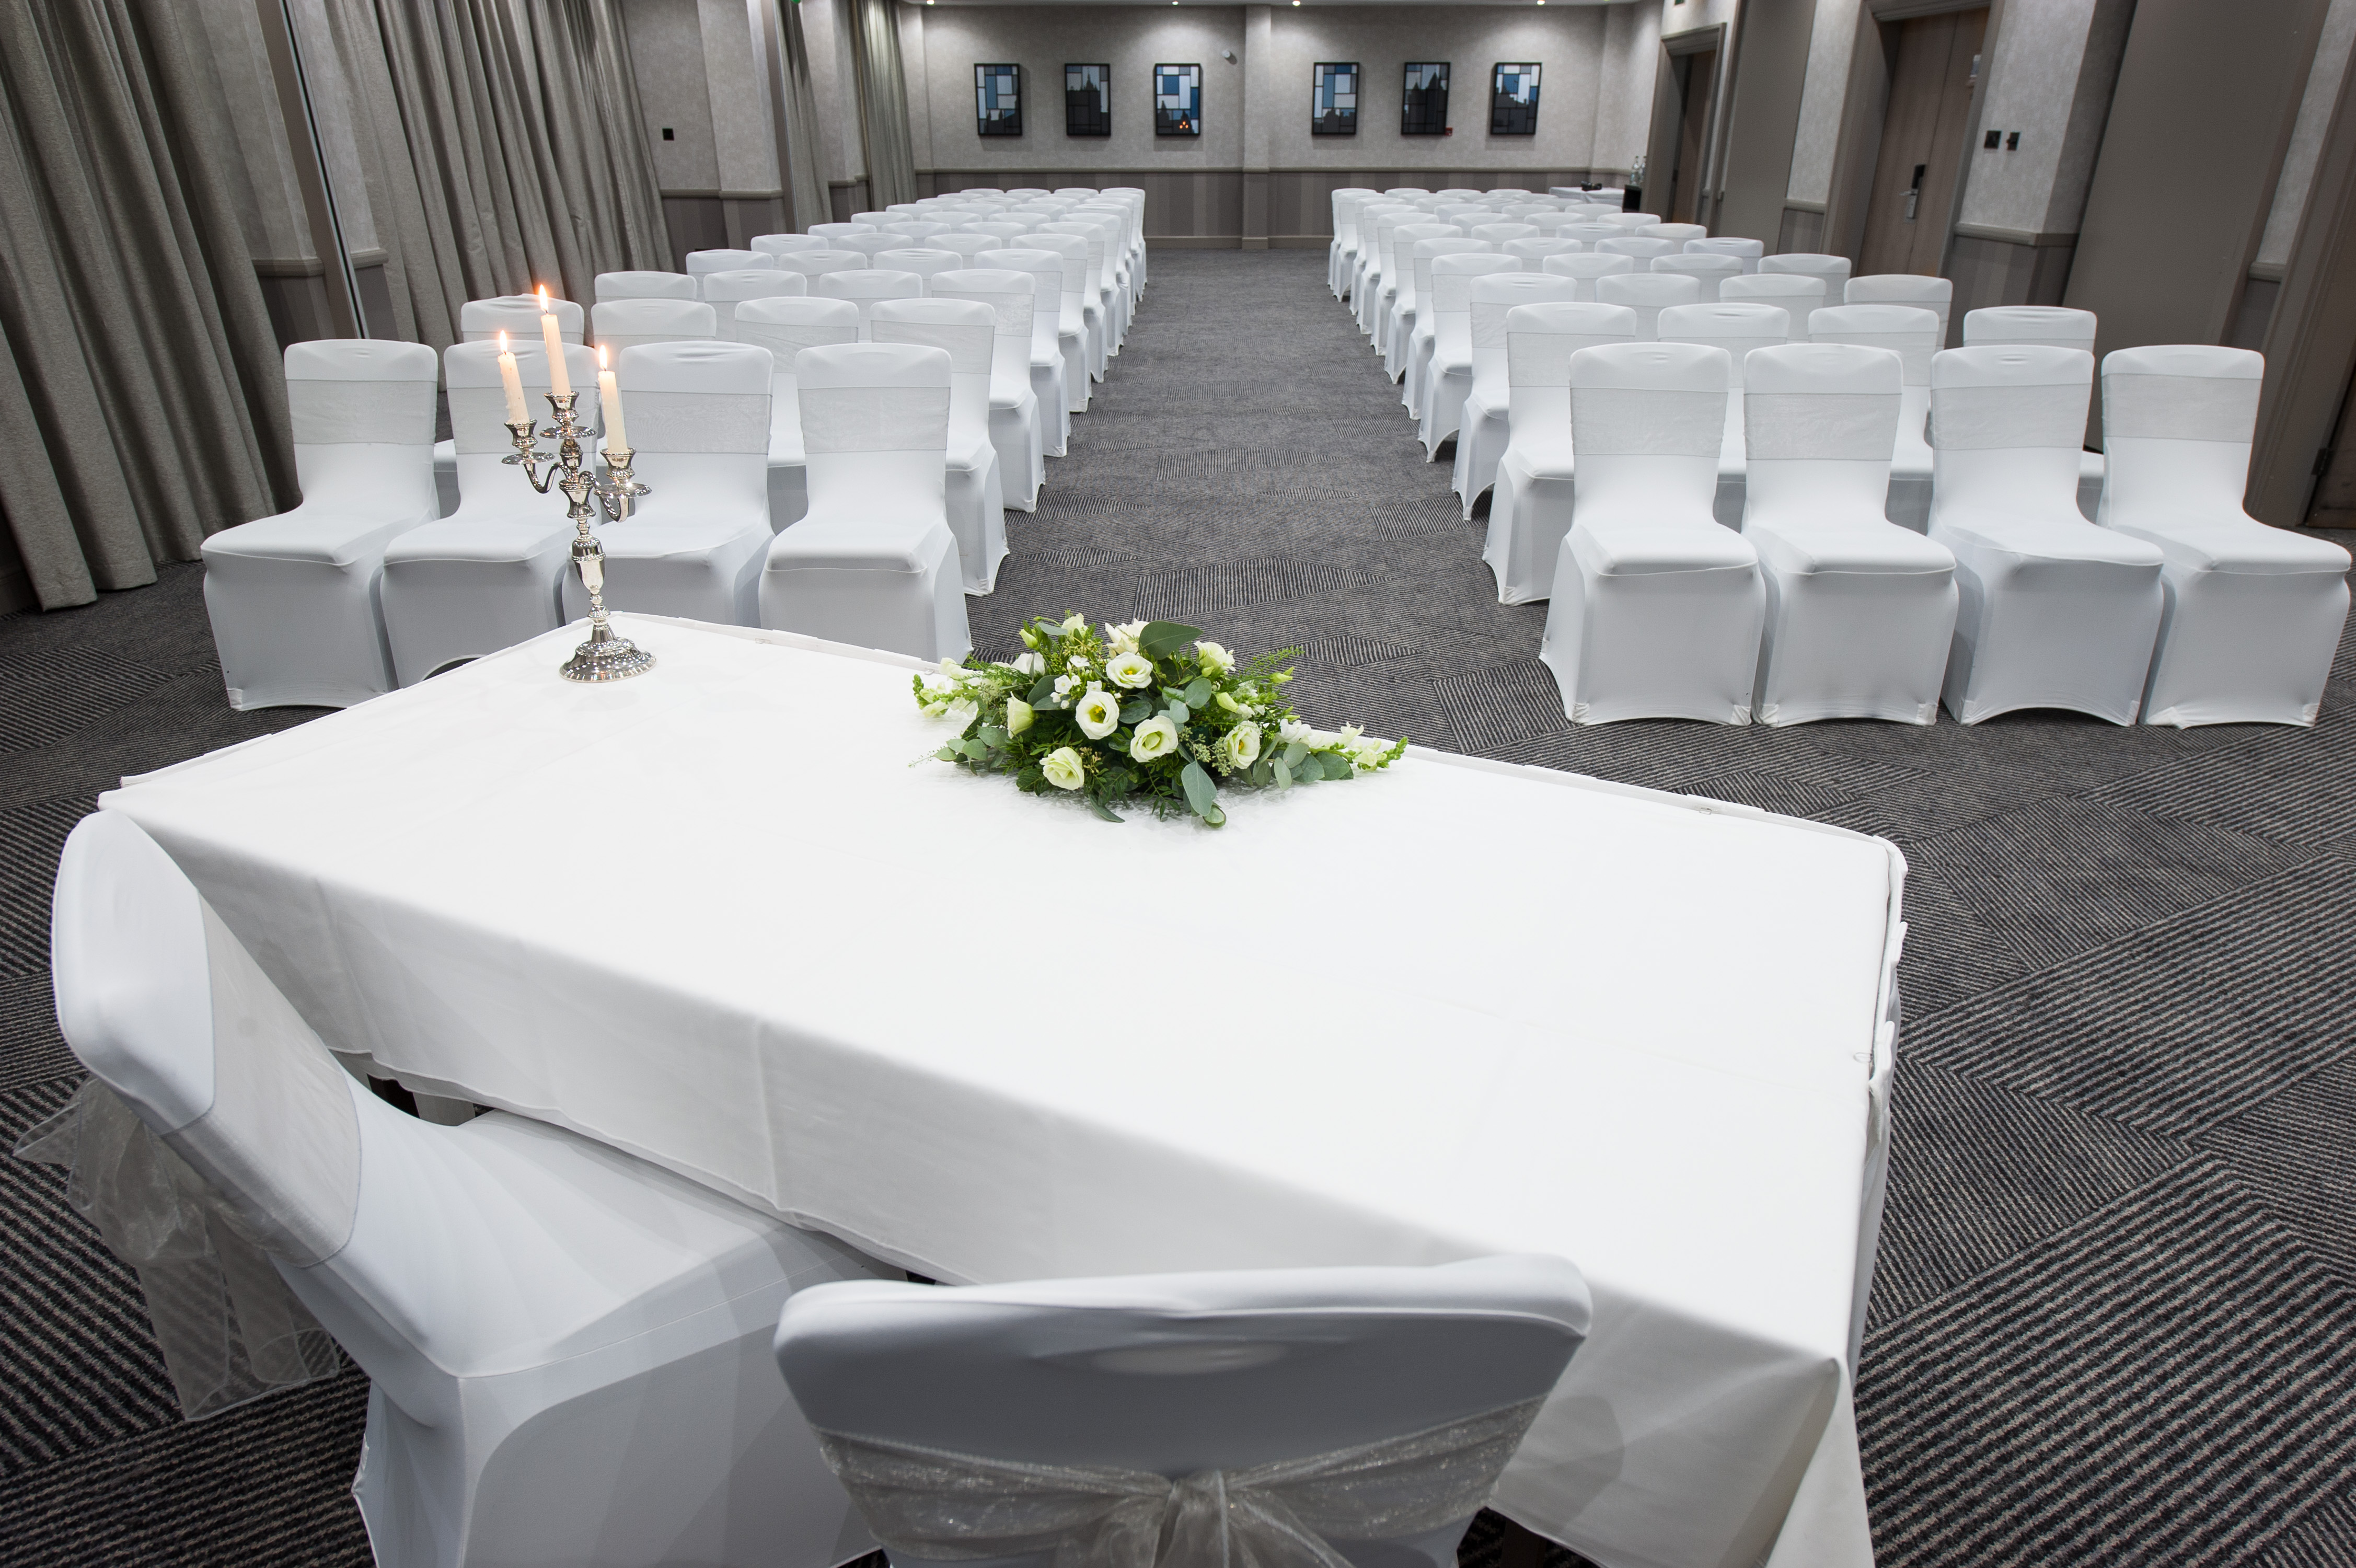 Front View of Meeting Room Arranged Theater Style With Rows of White Chairs Facing Table With Two Chairs, Candles and Flowers on White Linens